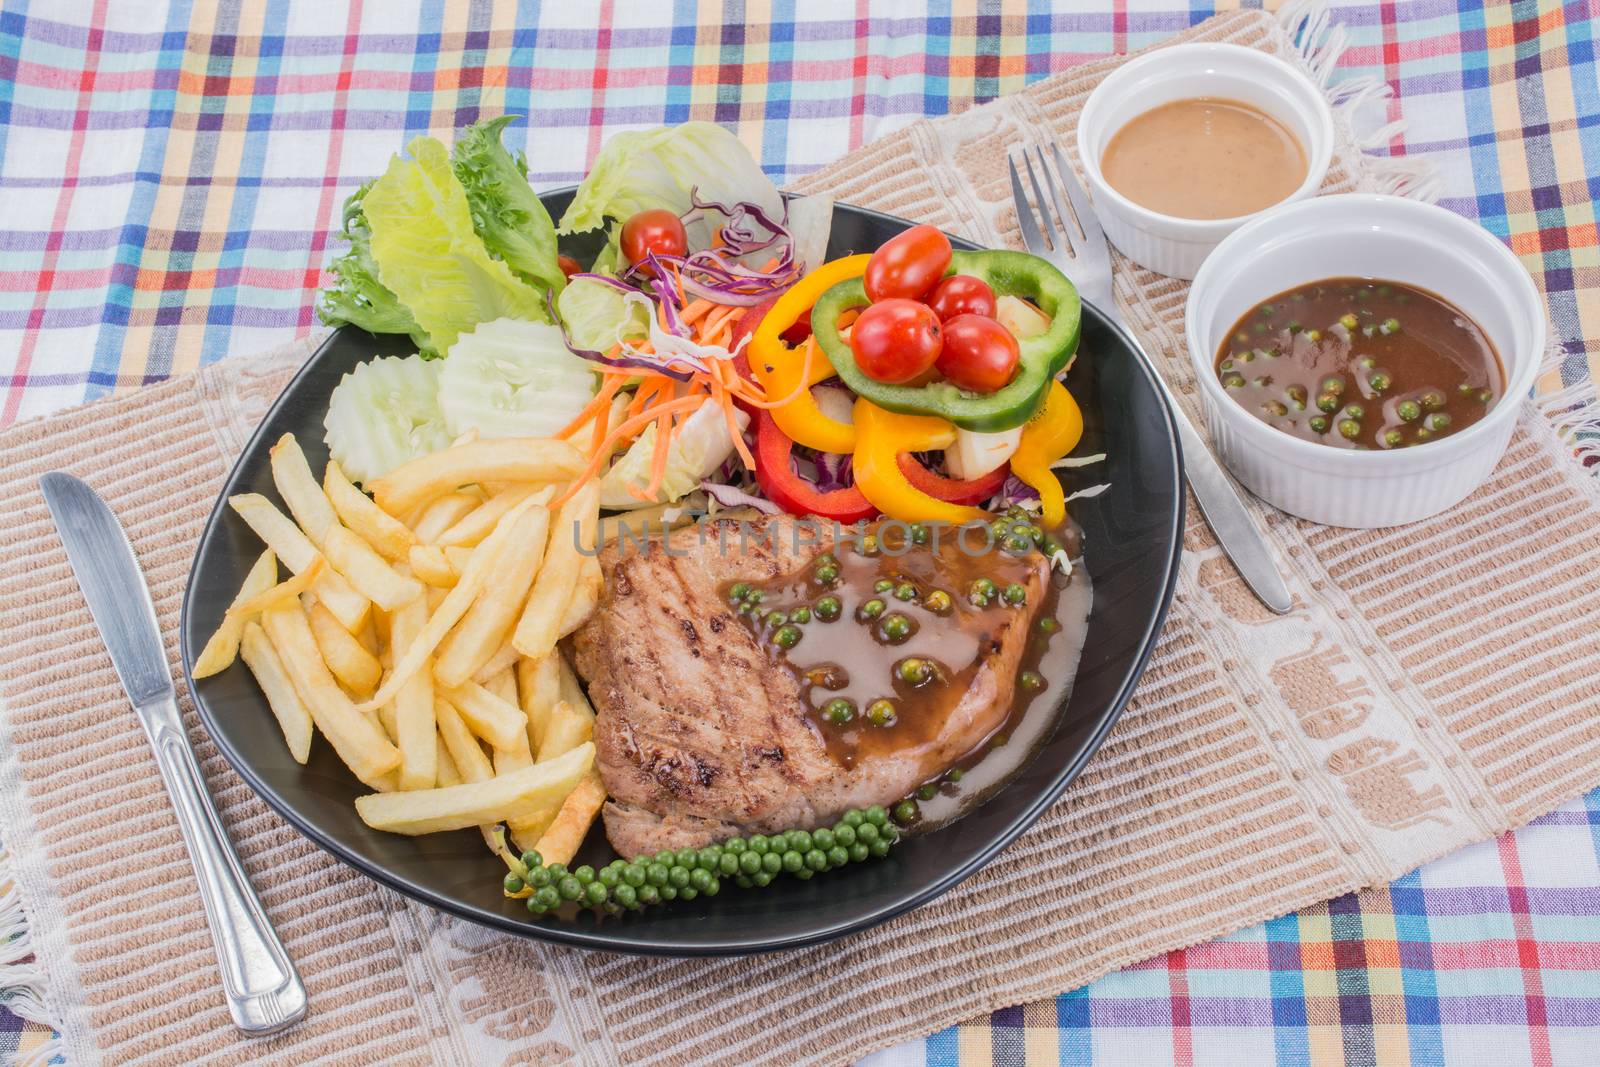 Pork steak with brown pepper sauce served with potato chips and salad with sesame japanese dressing.